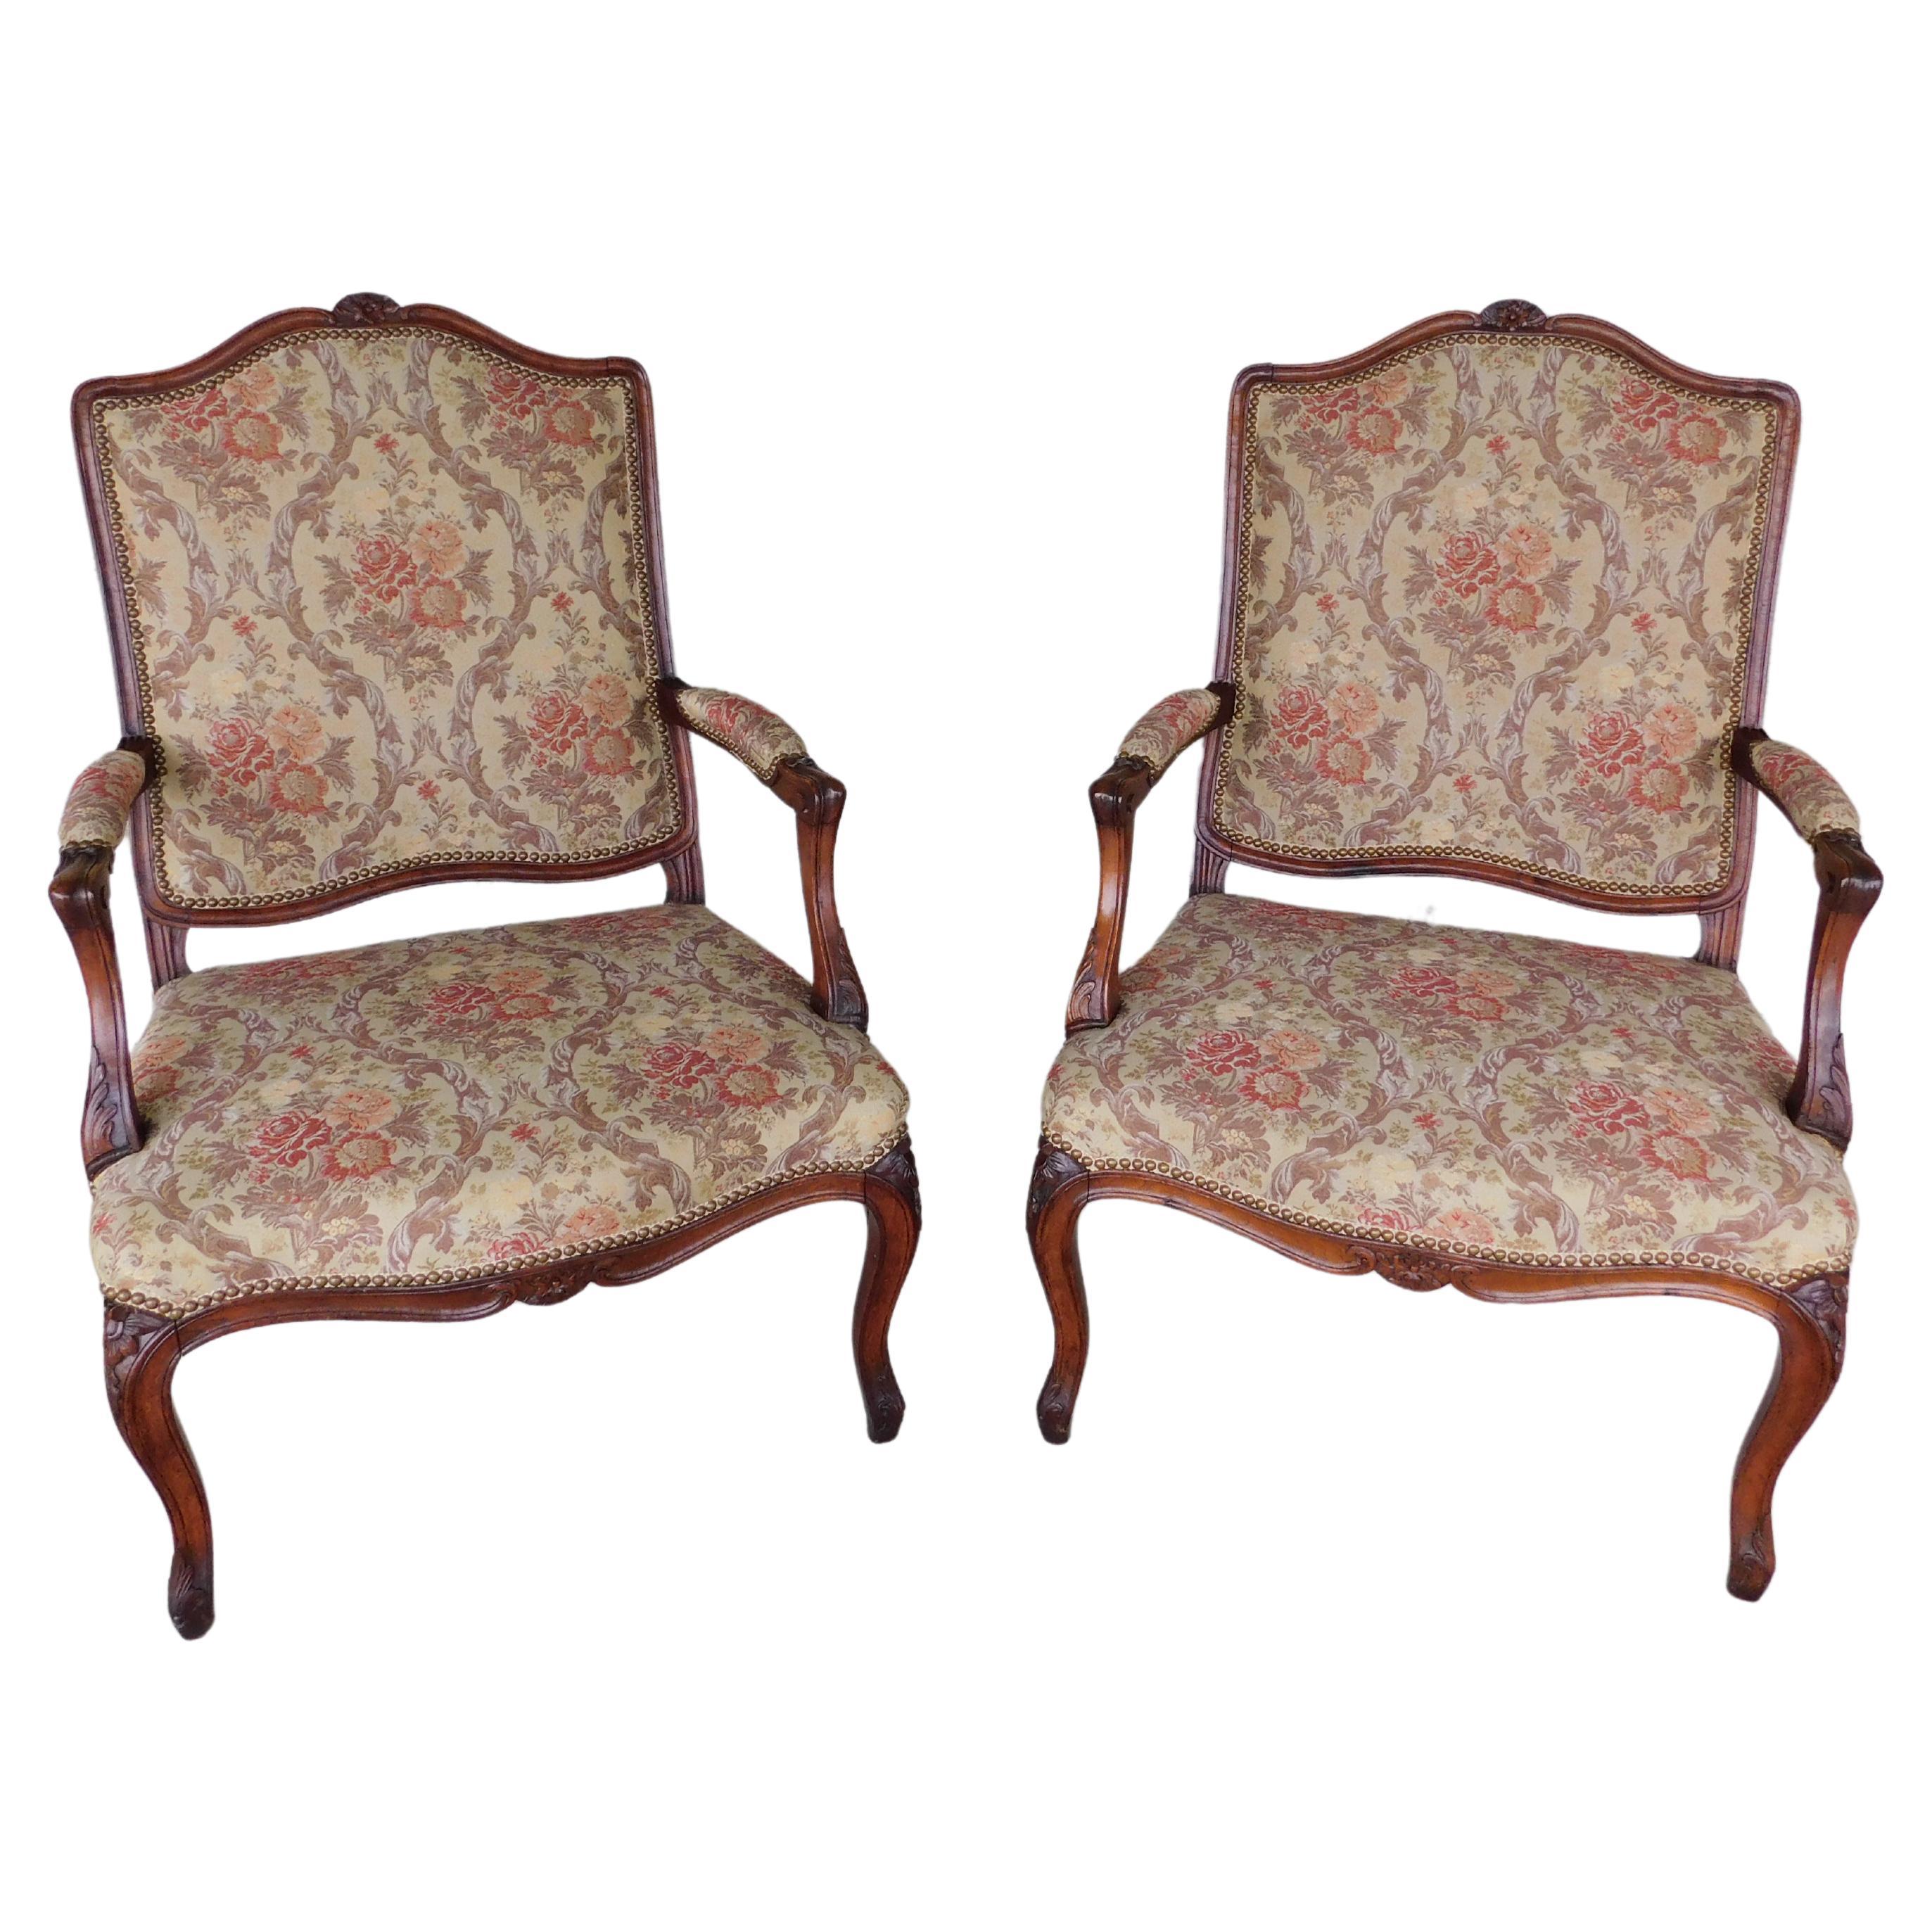 Vintage French Louis XV Style Fauteuil Chairs  - a Pair